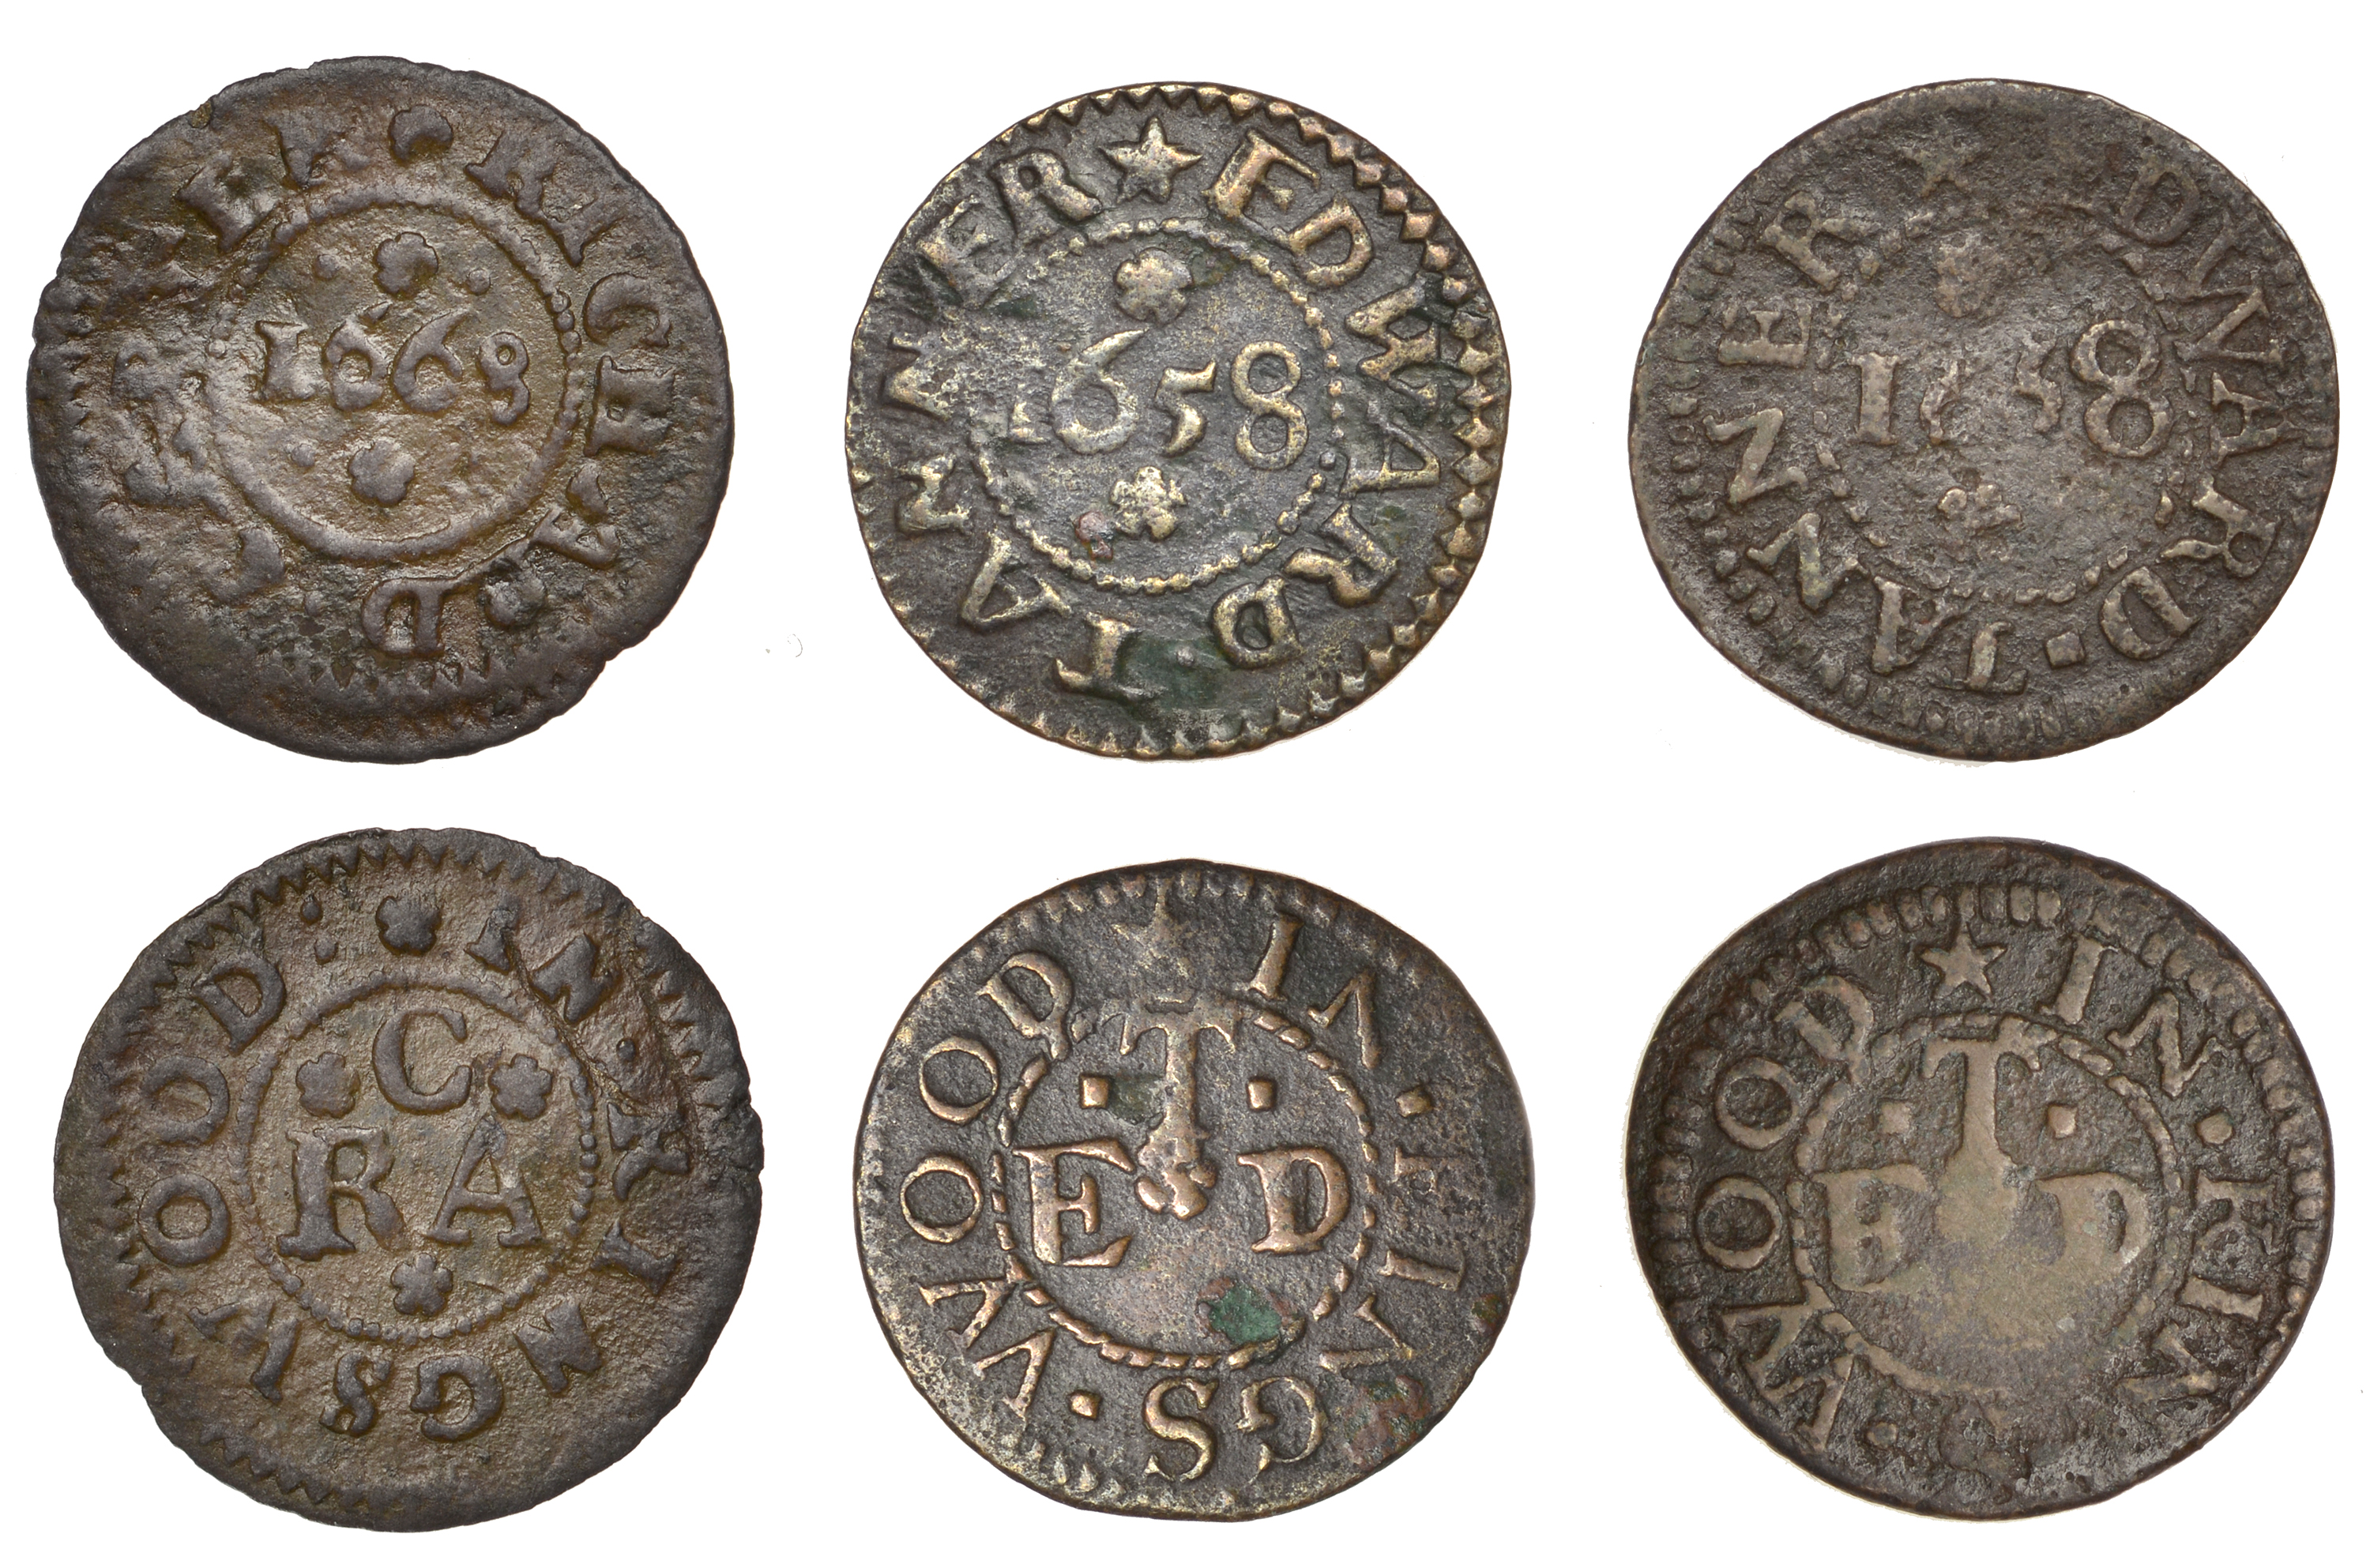 The Collection of Wiltshire Coins, Tokens and Paranumismatica formed by the late David Ward